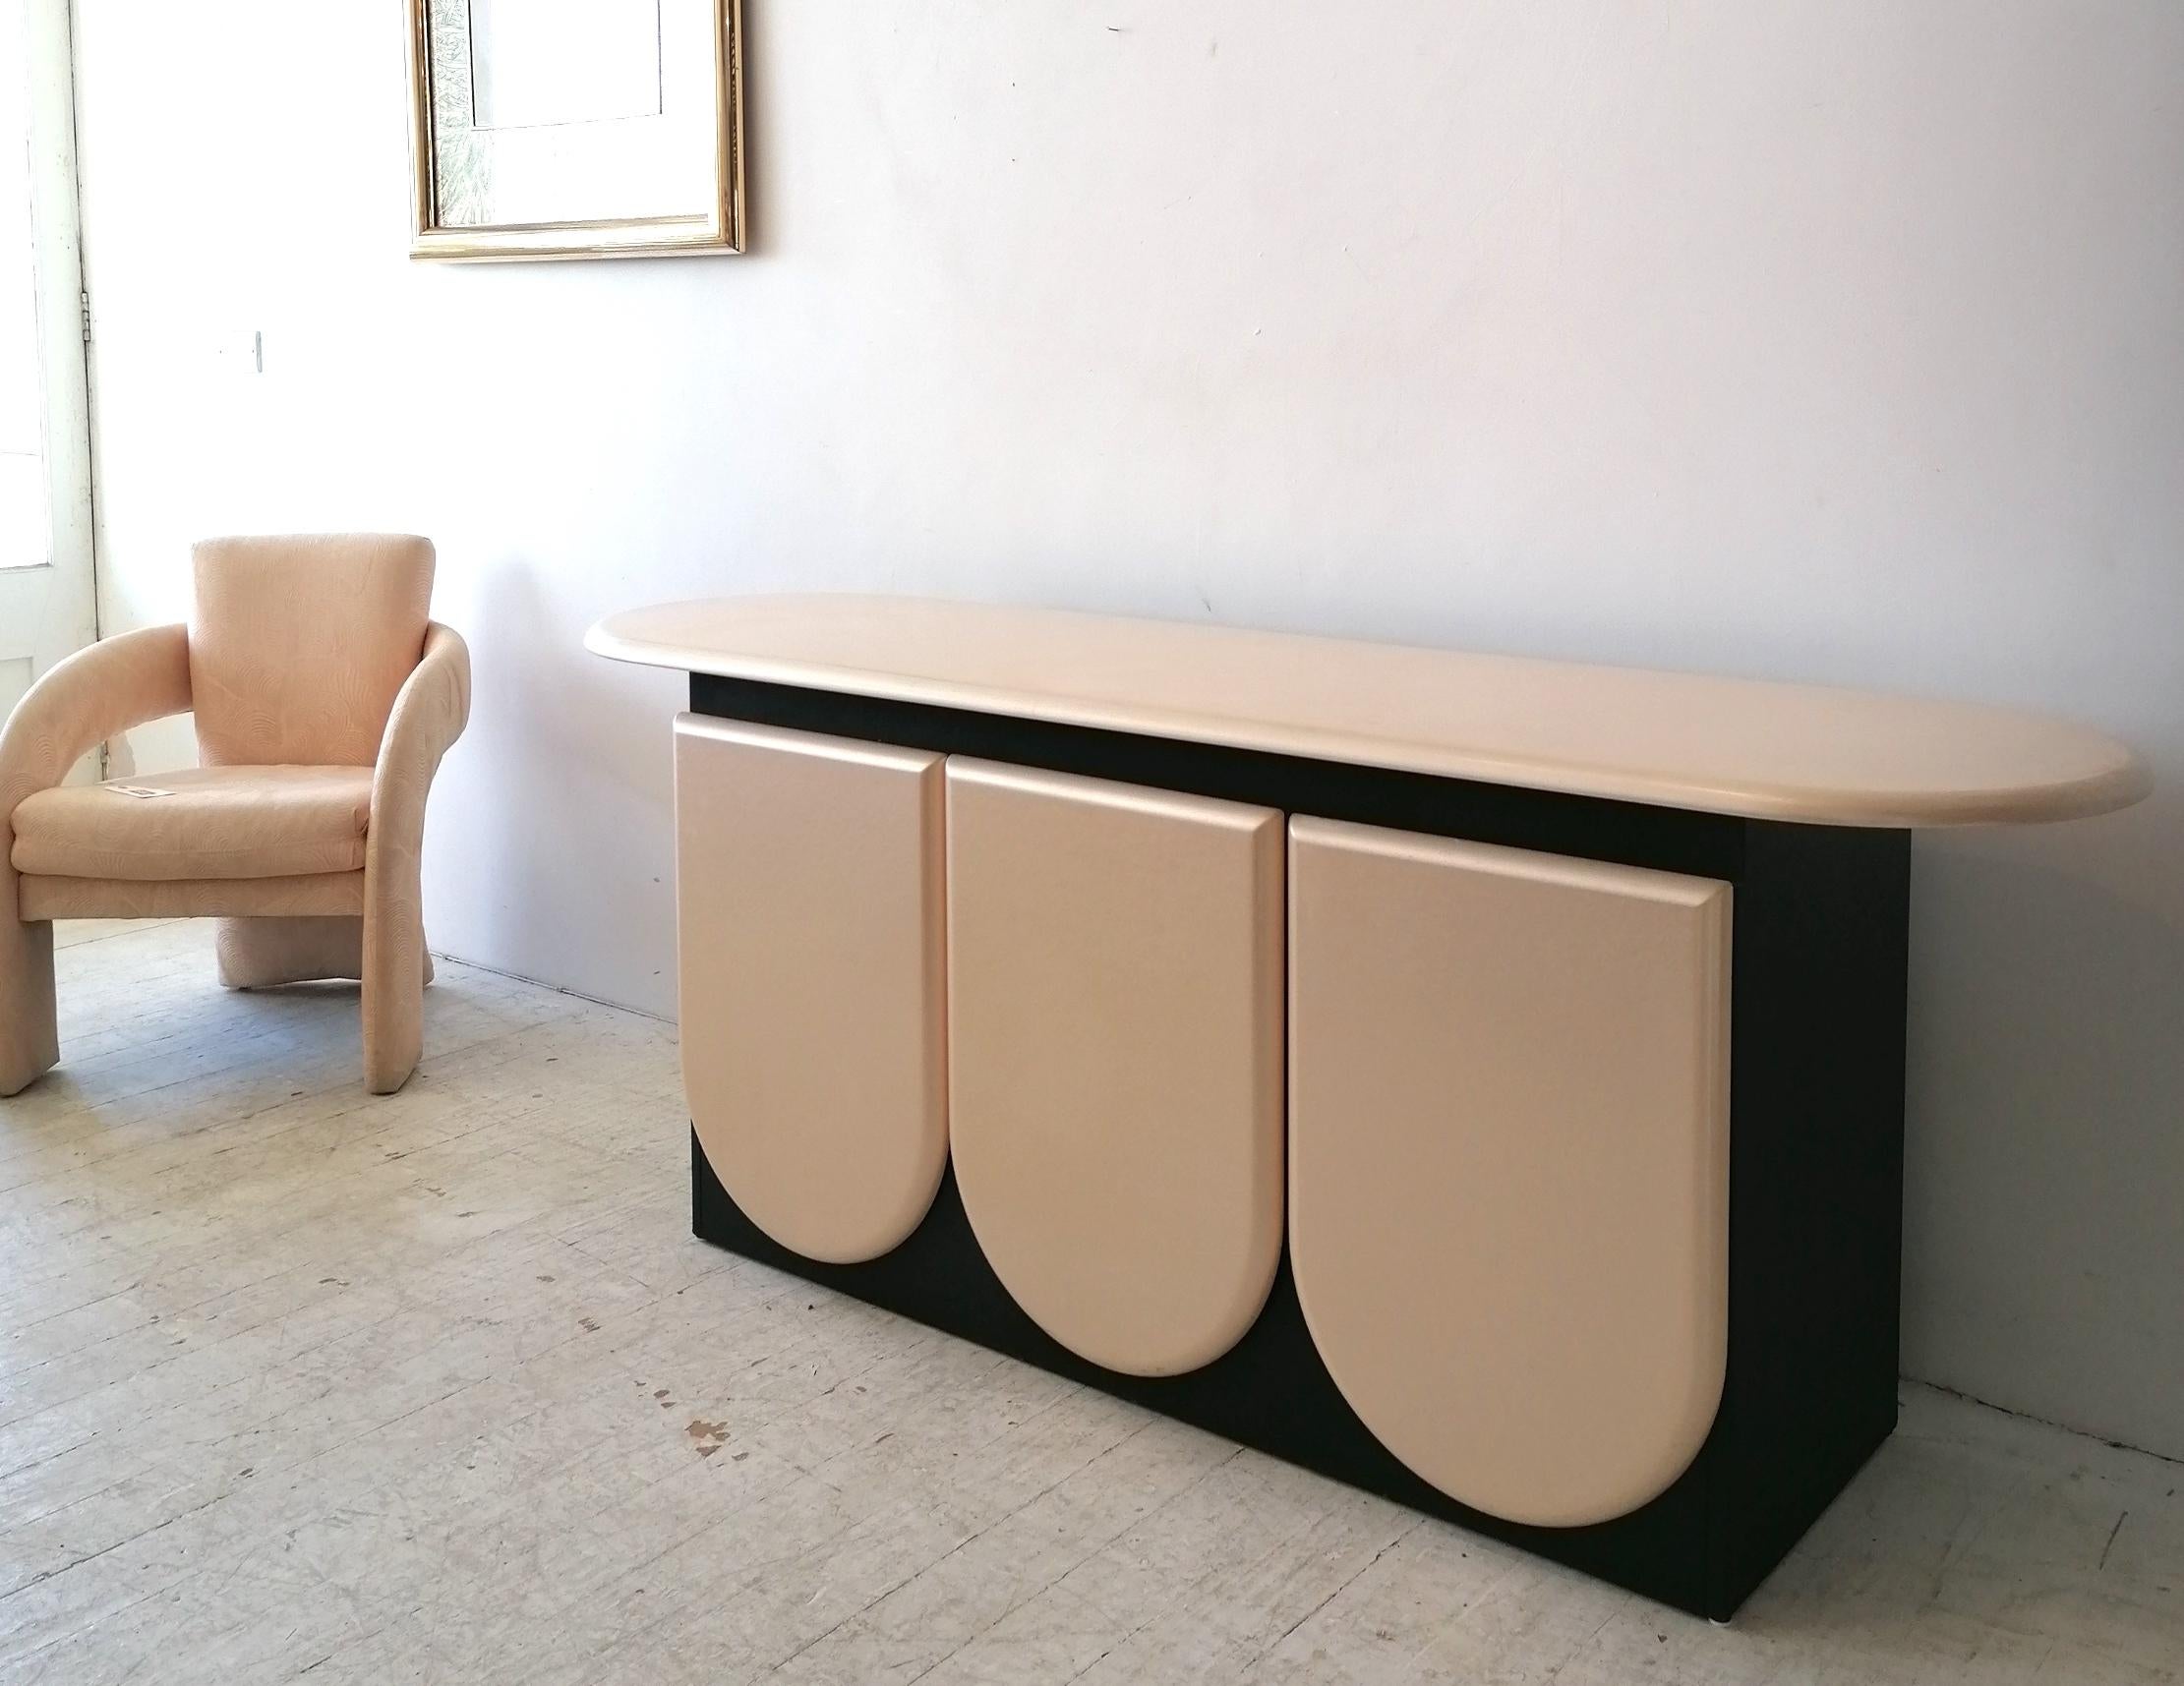 Canadian Pearl & Black Sideboard With Petal Shaped Doors, By Rougier, Canada 1980s